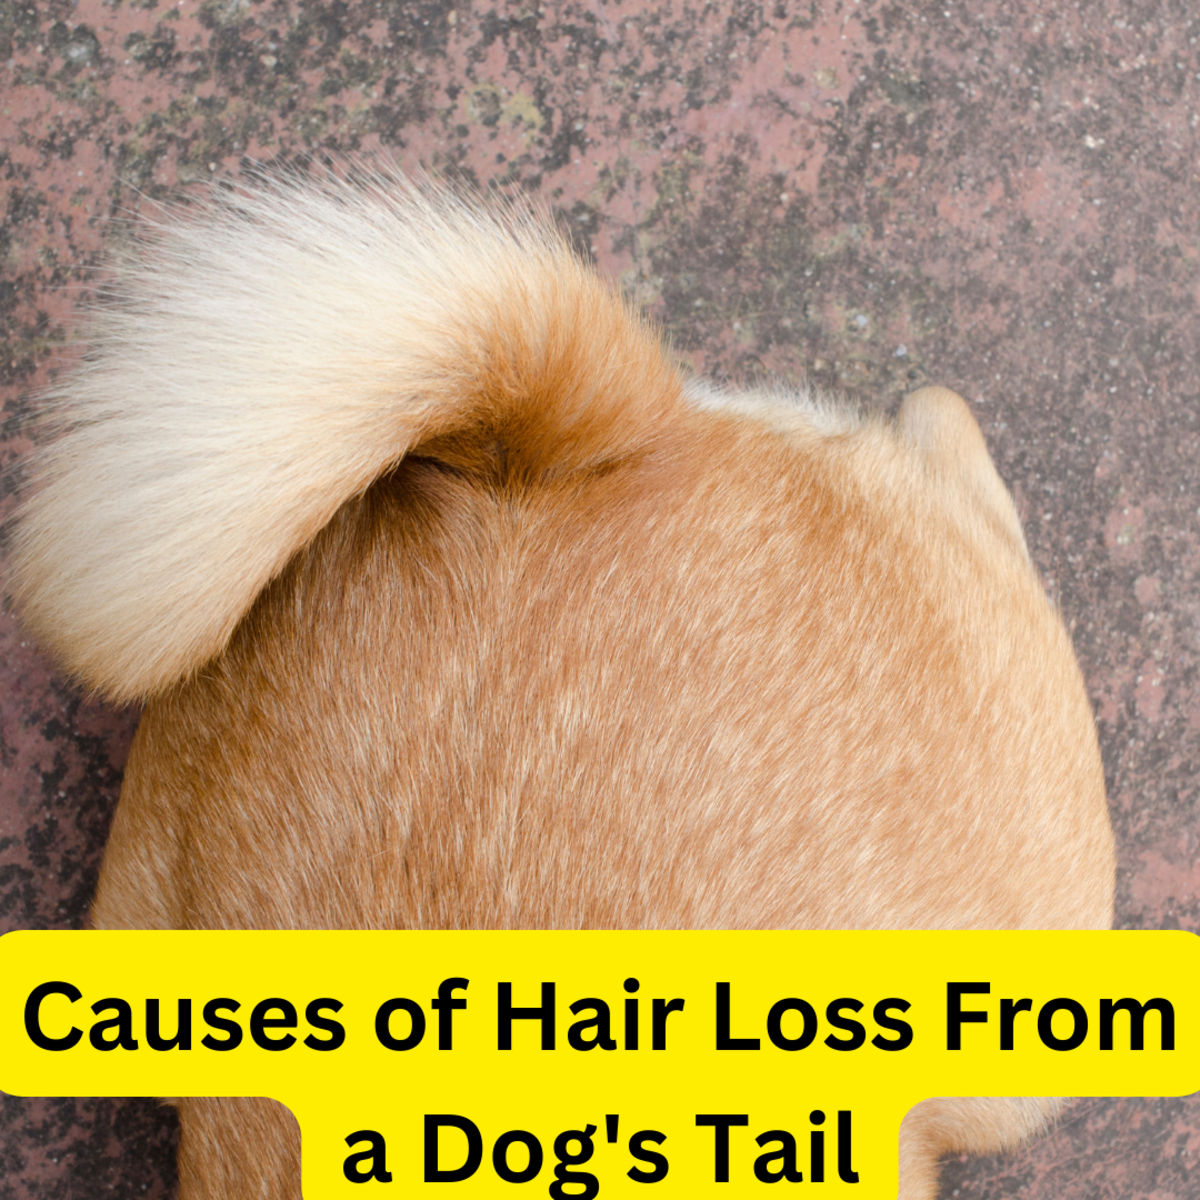 10 Causes of Hair Loss From A Dog’s Tail